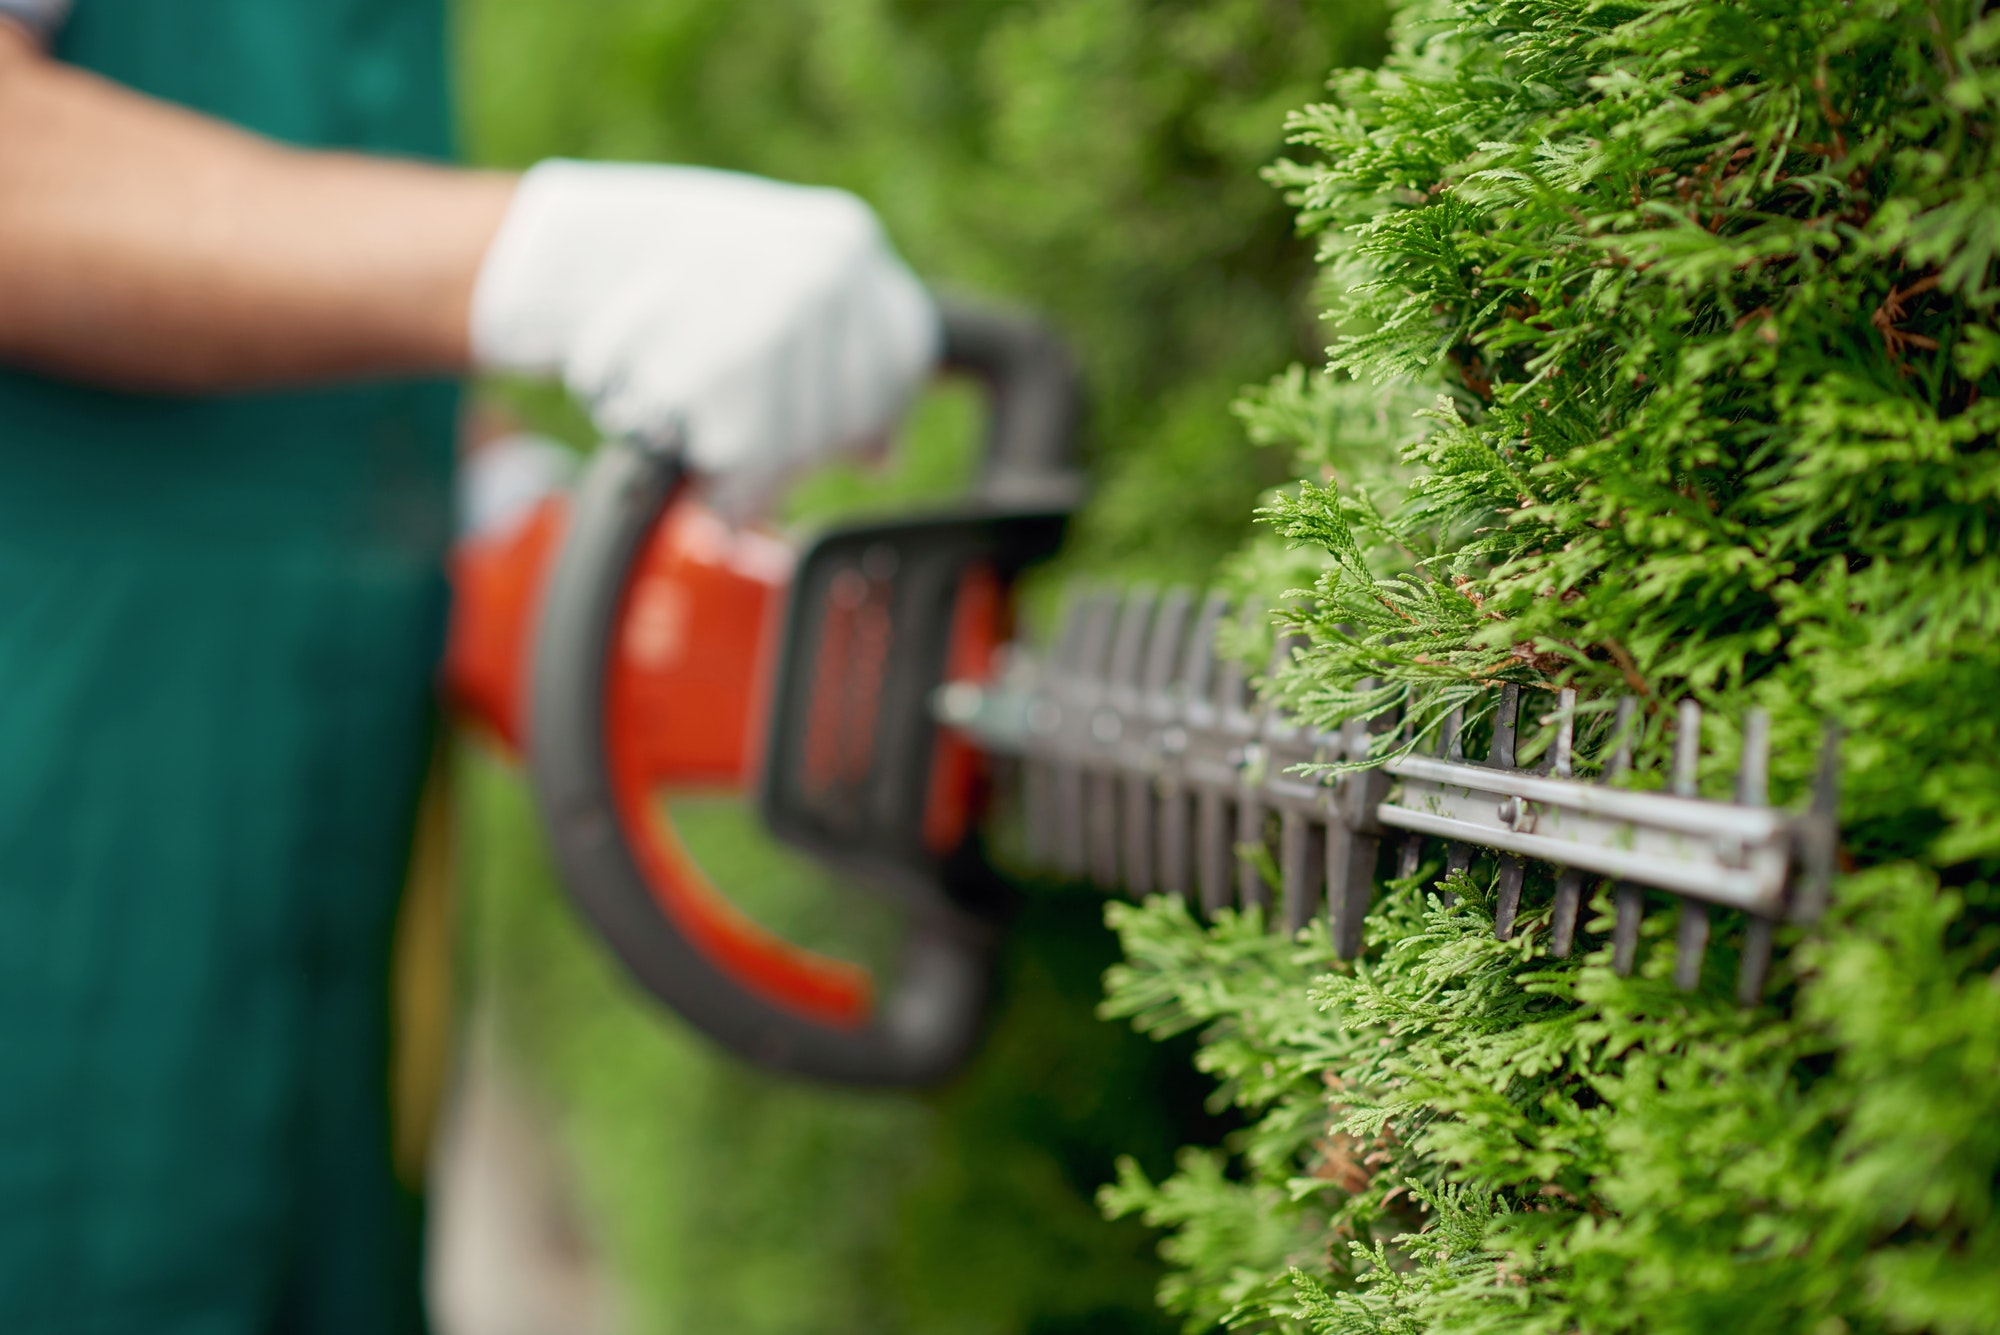 Hedge Trimming Sunshine Coast - Male gargener trimming hedge using special tool